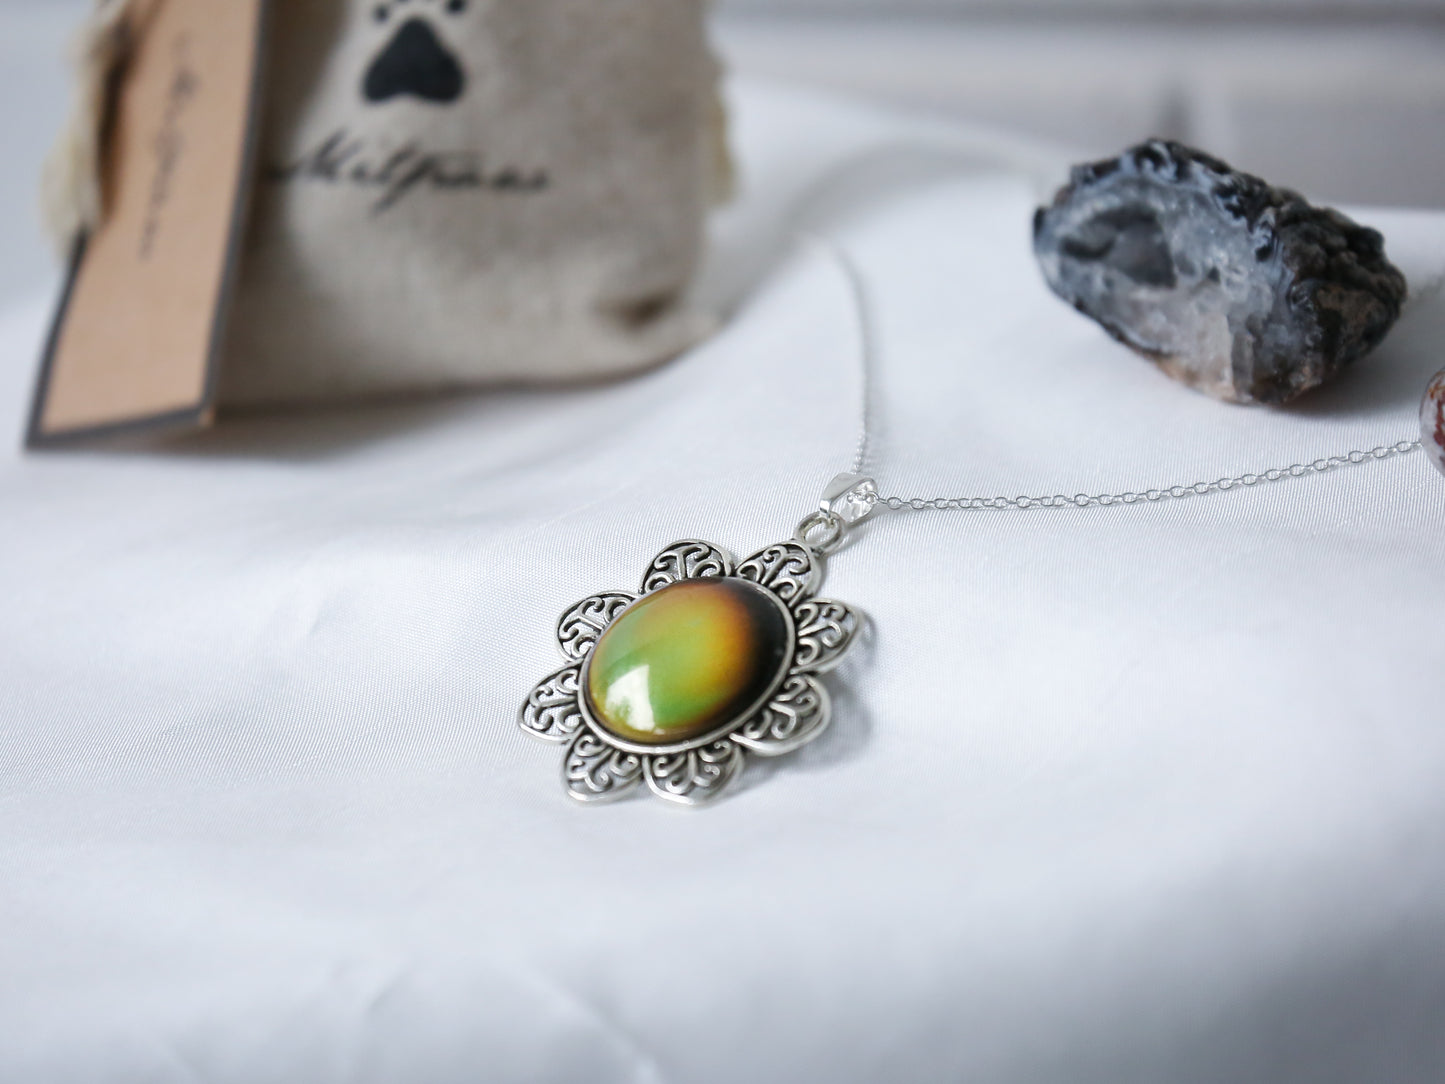 Vintage Sunflower Colour Changing Necklace with 925 Silver Chain - Mitpaw